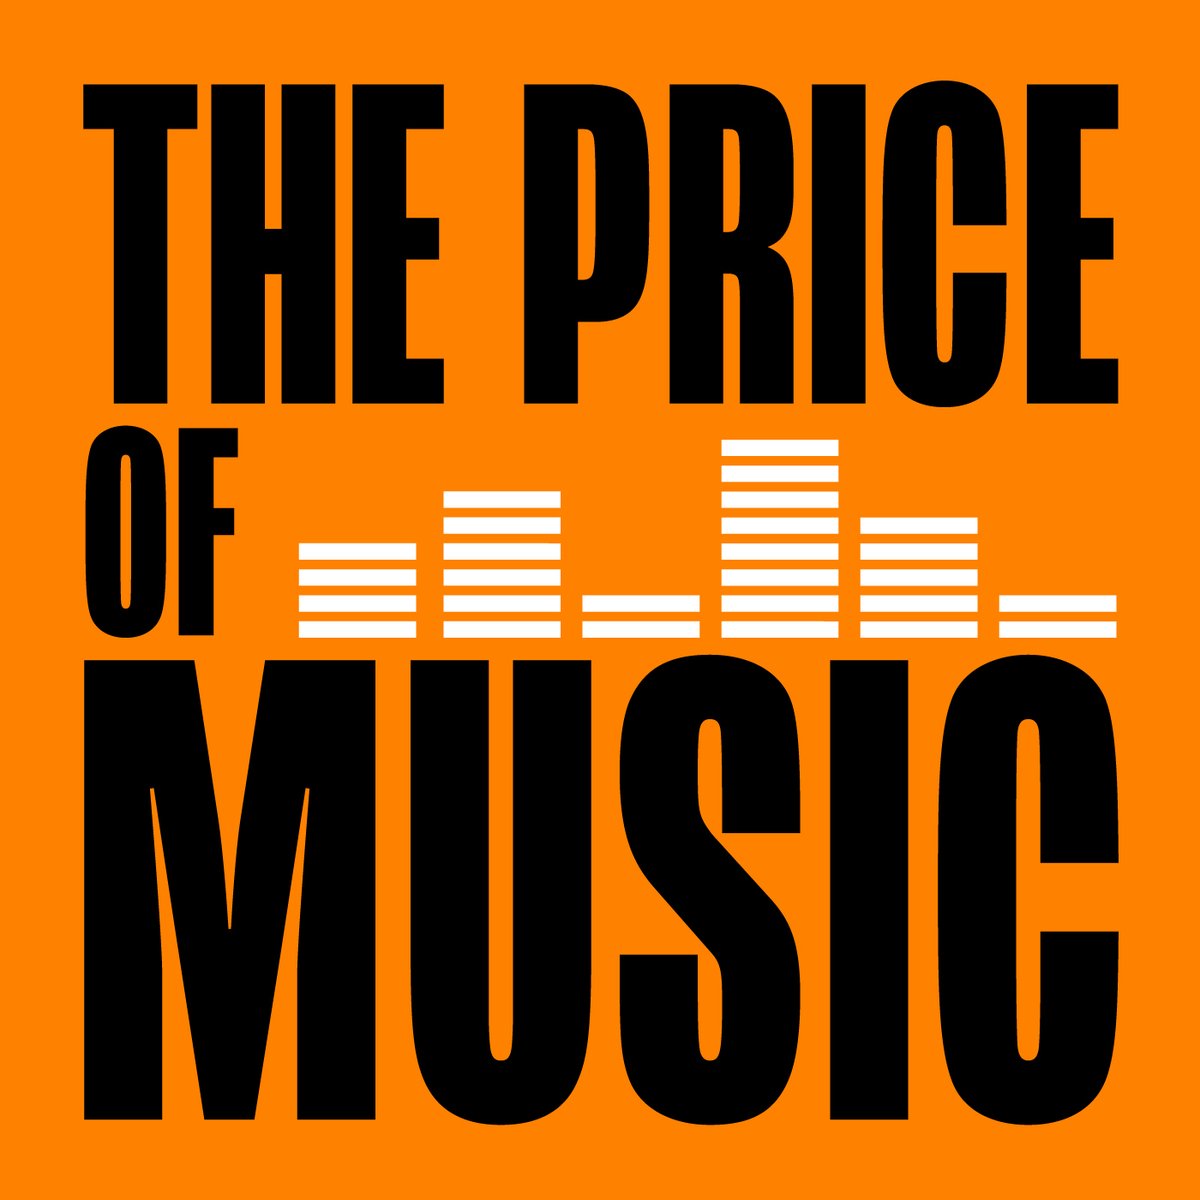 The latest episode of The Price of Music - featuring an in-depth interview with Global Head of @SpotifyArtists, marketing and policy, Sam Duboff... 🎚️Latest 'Loud and Clear' report 🎚️Artist payouts 🎚️Music industry evolution Listen now wherever you get your #podcasts...